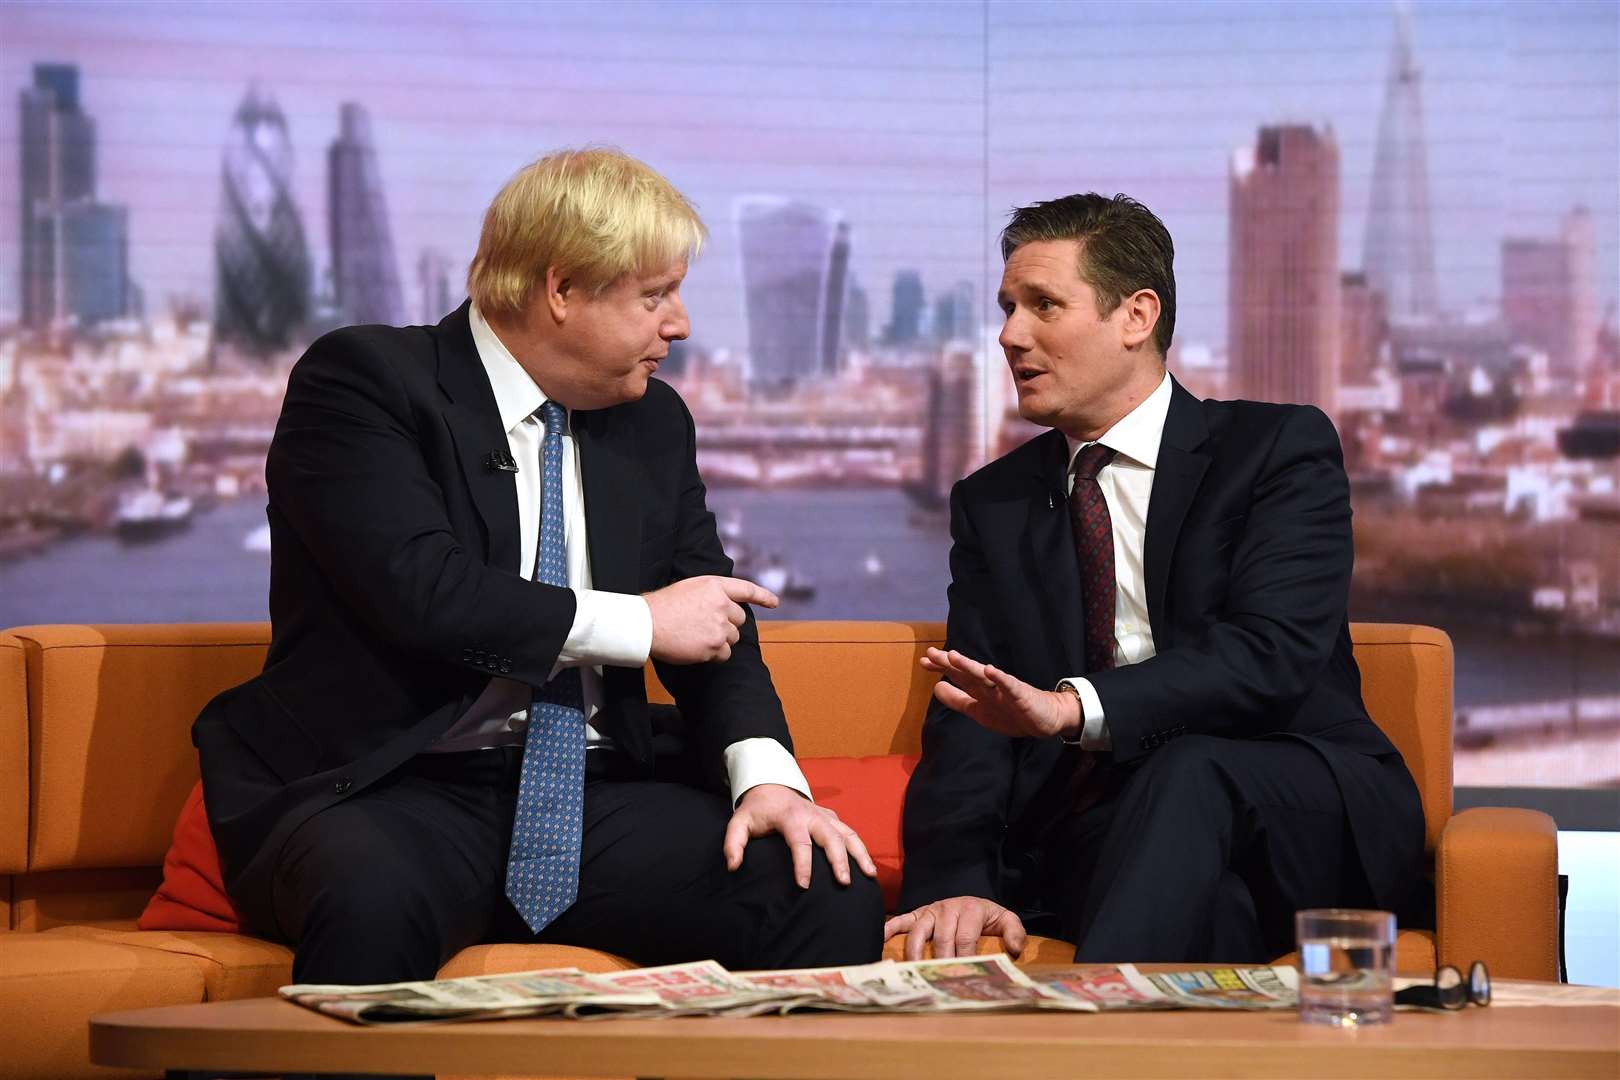 Boris Johnson’s Conservatives have lost ground to Sir Keir Starmer’s Labour, according to a new survey (Victoria Jones/PA)